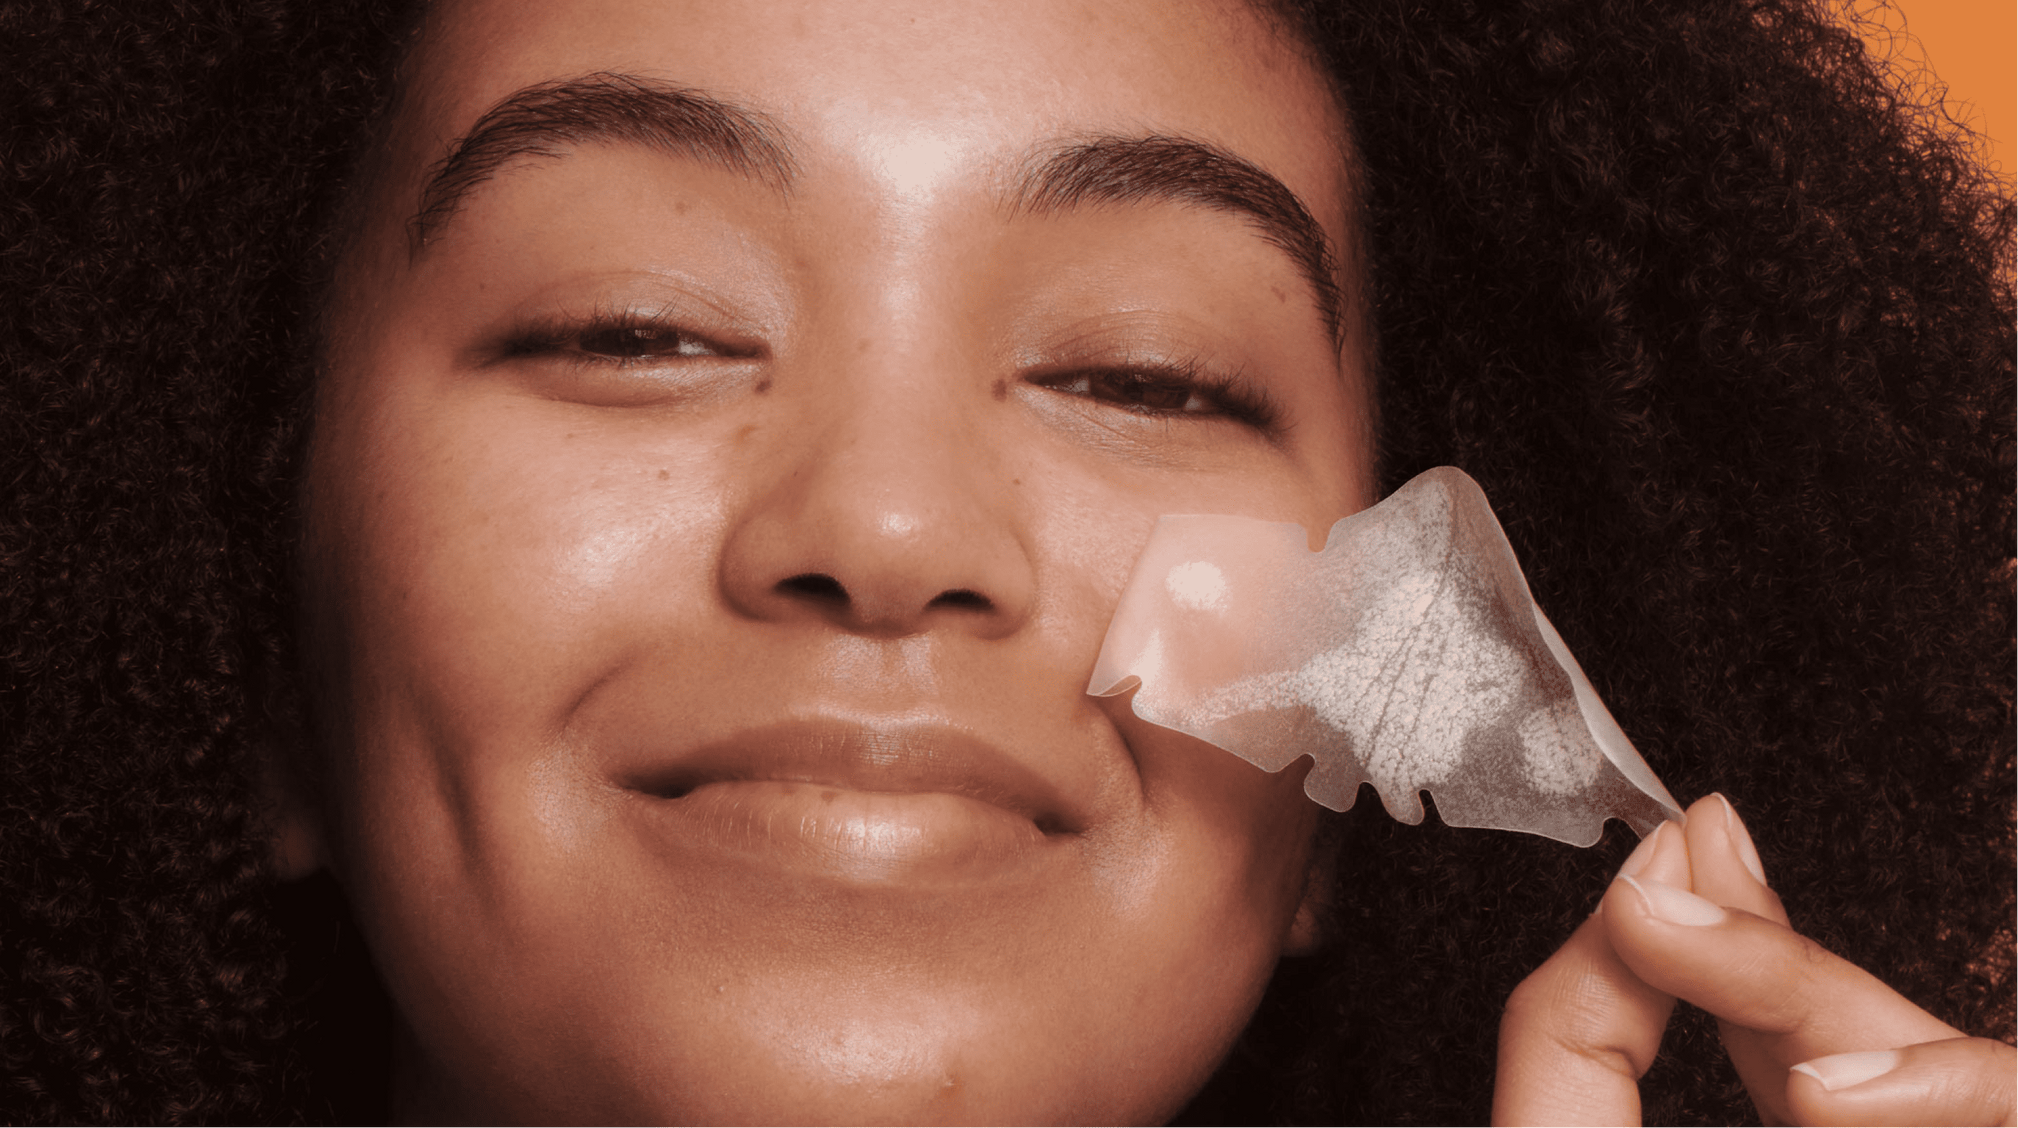 Sebaceous Filaments or Blackheads? How to Tell the Difference between Those Spots on Your Nose